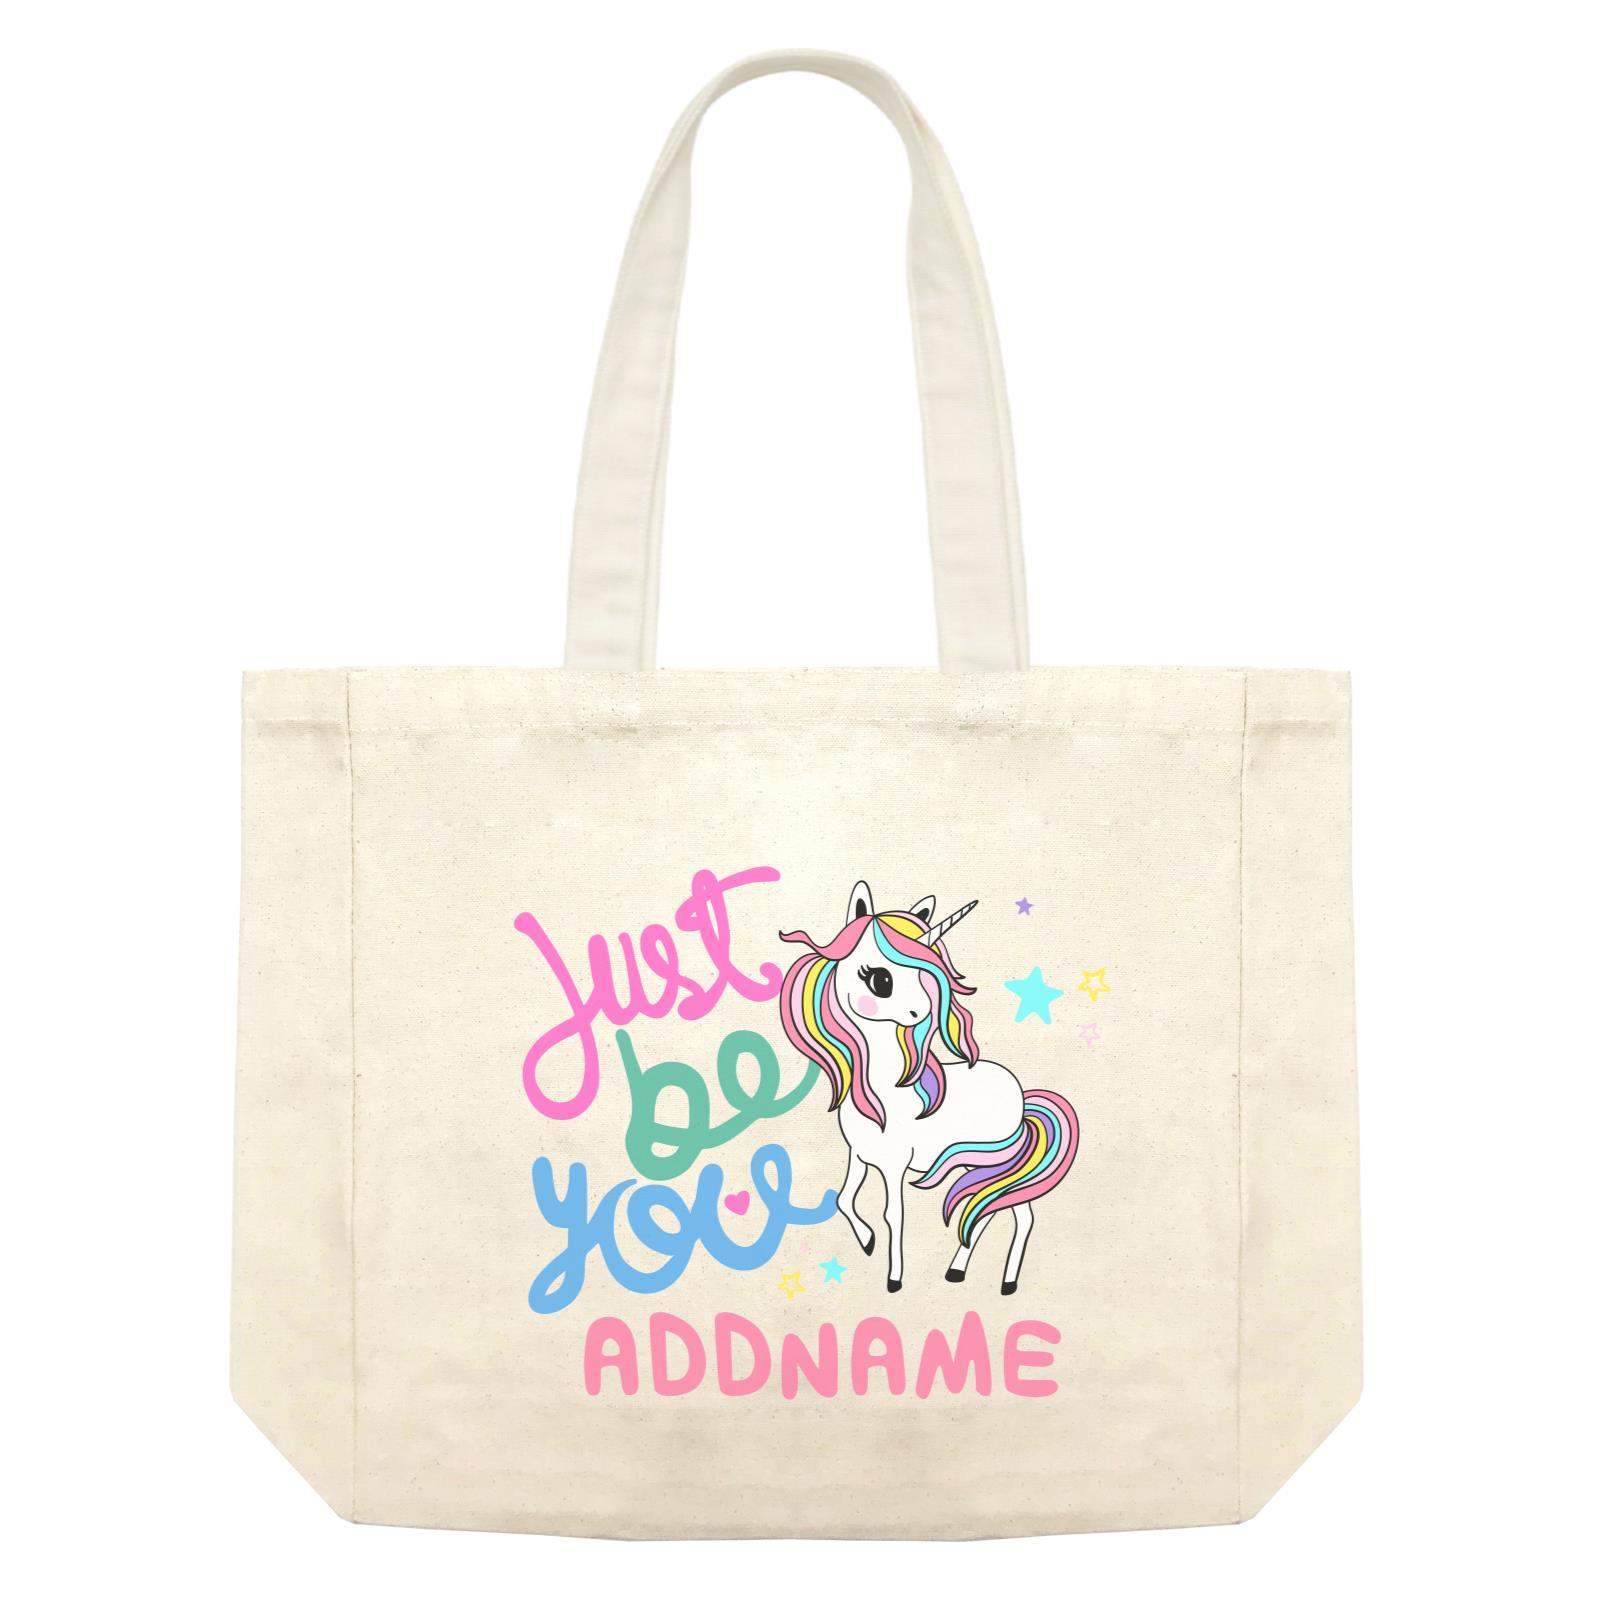 Children's Day Gift Series Just Be You Cute Unicorn Addname Shopping Bag